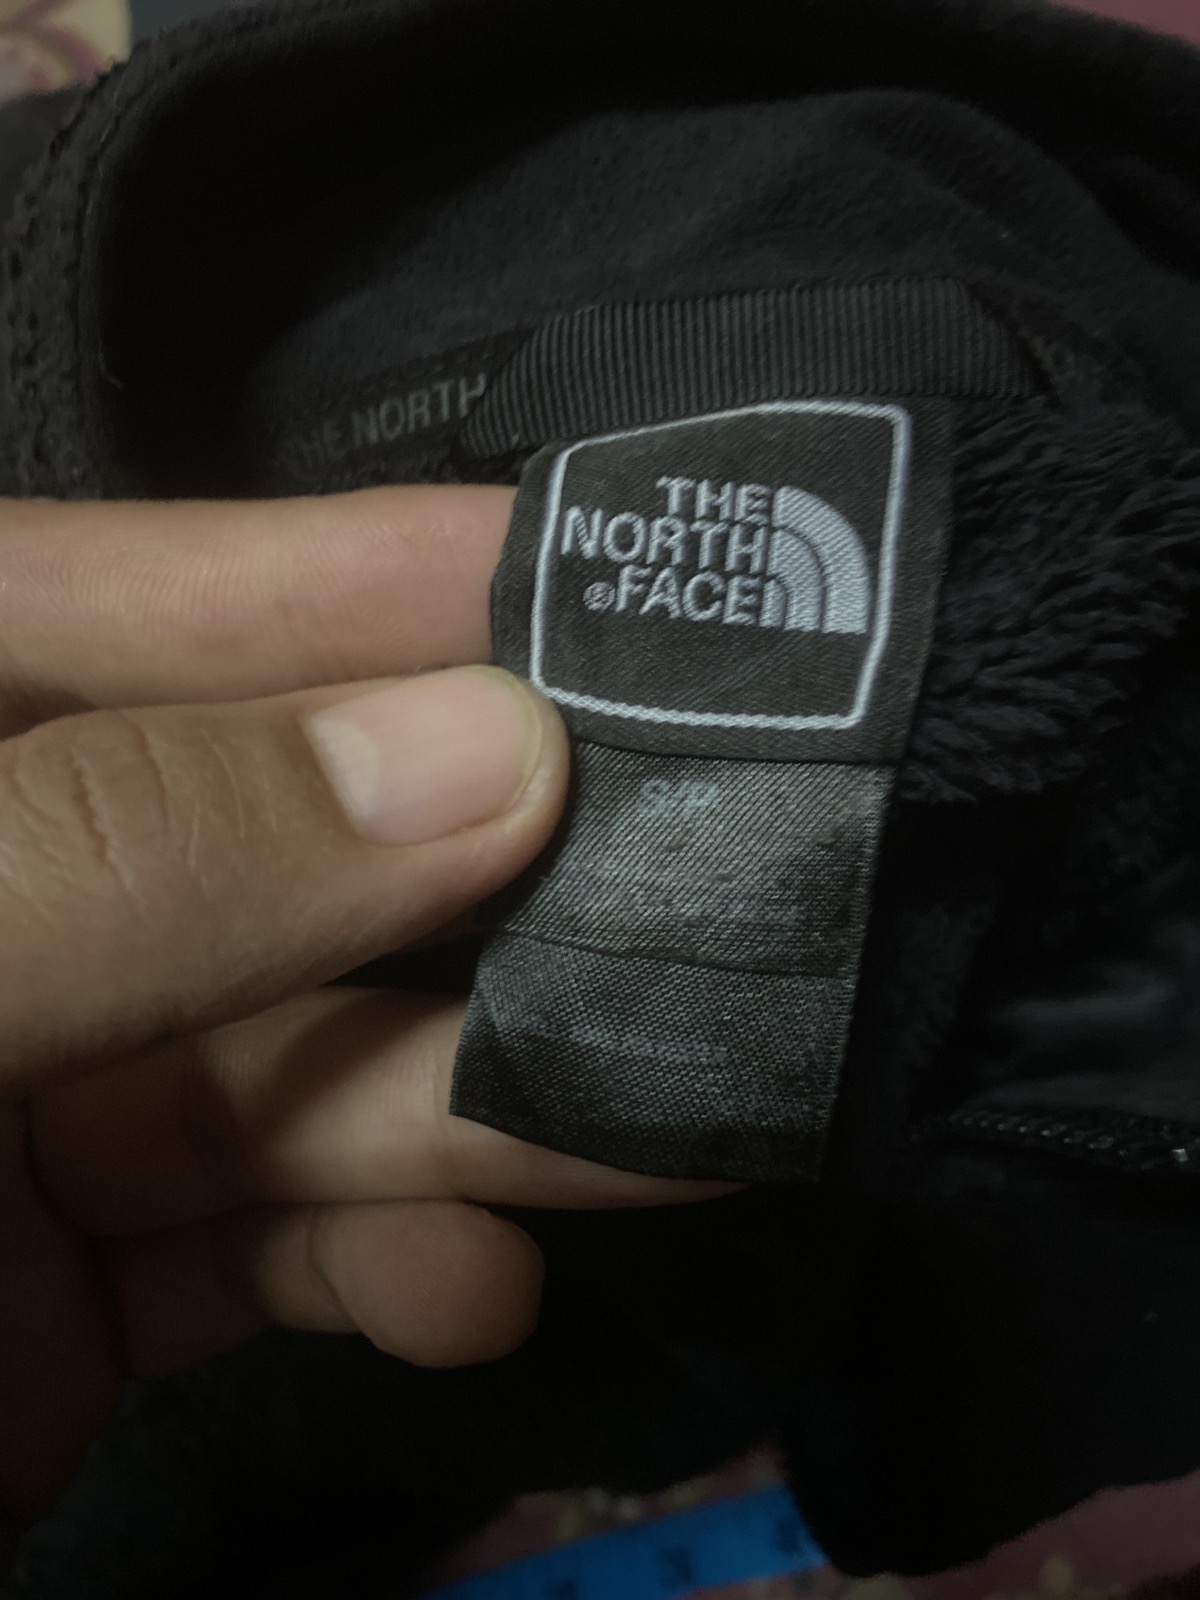 🔥SALE🔥THE NORTH FACE SHERLING FLEECE JACKET - 6